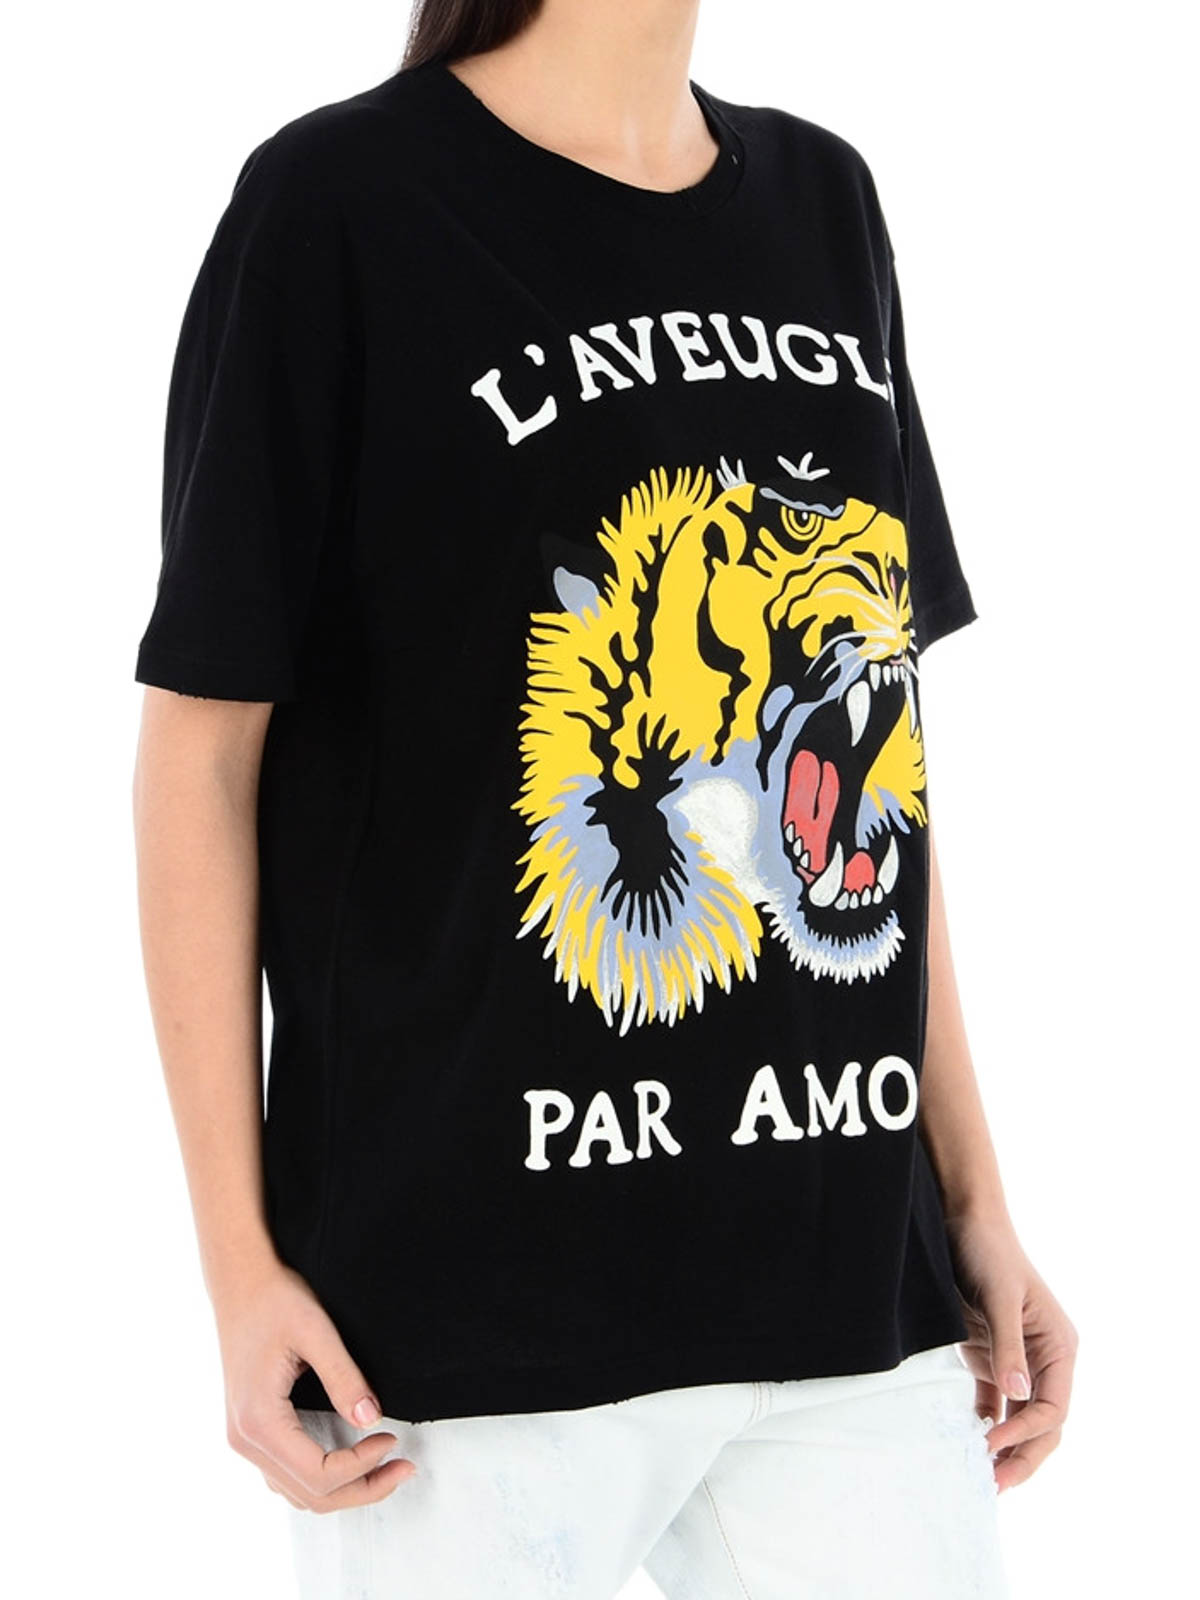 gucci t shirt amour